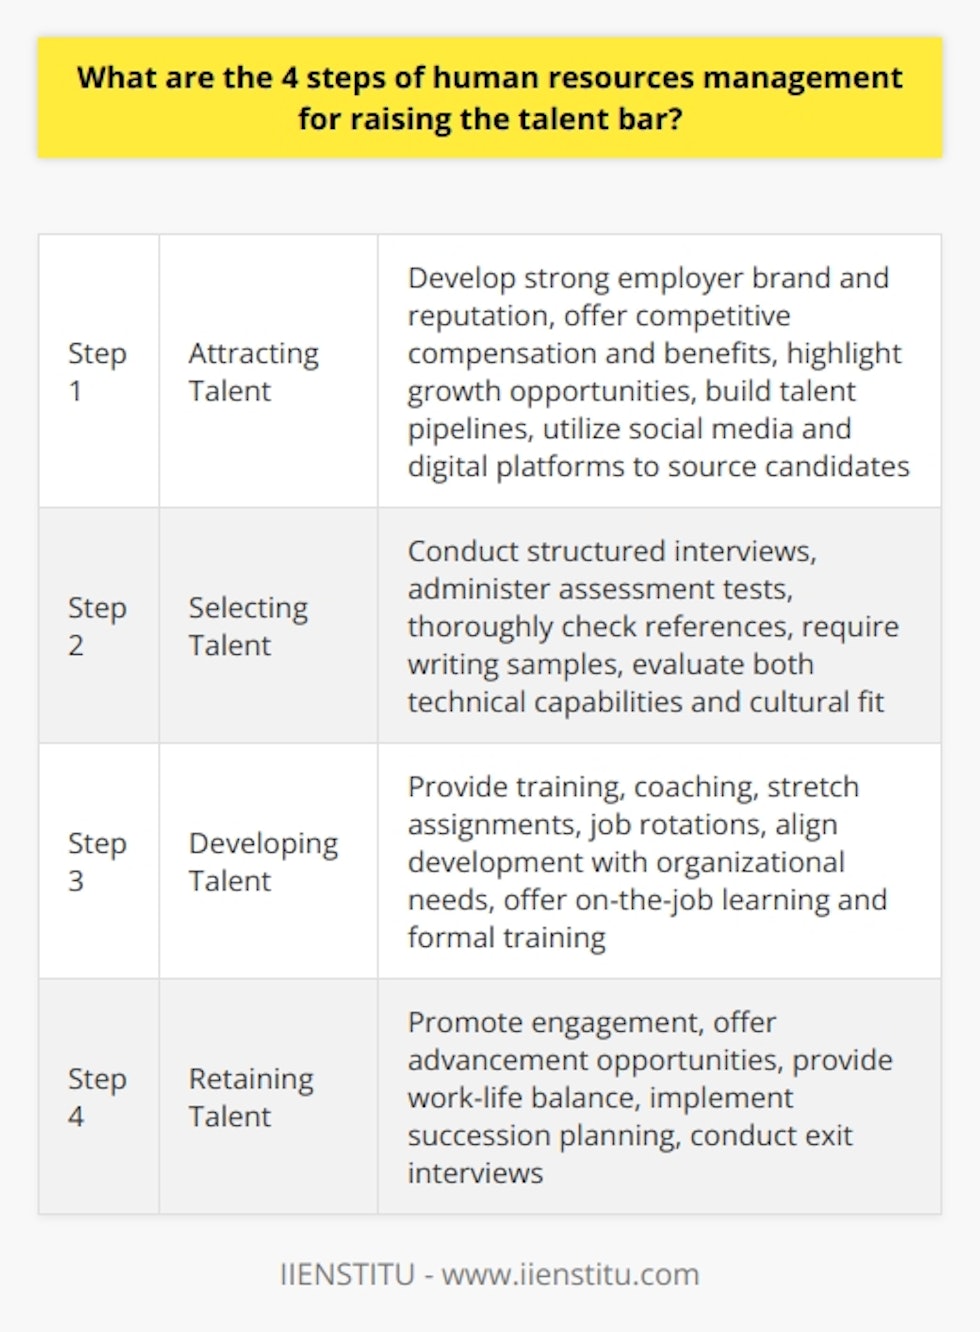 Here is a detailed content on the 4 steps of human resources management for raising the talent bar:Attracting TalentThe first step in raising the talent bar is to attract highly skilled and qualified candidates to apply for open positions. This starts with developing a strong employer brand and reputation in the industry as a desirable place to work. Offering competitive compensation and benefits is key, as is highlighting development and growth opportunities within the organization. Building talent pipelines is also important through internship programs, university recruiting, and employee referrals. Utilizing social media and digital platforms to source passive candidates can expand the talent pool. The goal is to position the organization as an employer of choice to connect with top talent in the market.Selecting Talent  Once talent is attracted through recruiting efforts, the next step is selecting the best candidates to hire through a rigorous screening and assessment process. This includes conducting structured interviews, administering tests to assess both hard skills and cognitive abilities, thoroughly checking references, and requiring writing samples or portfolios to evaluate candidates. A focus should be placed on evaluating both technical capabilities and cultural fit. The ultimate goal is to carefully hire those candidates that demonstrate the highest potential to succeed in the organization.Developing TalentAfter top talent is hired, the third step is developing their skills and leadership capabilities through training, coaching, stretch assignments, job rotations, and other developmental experiences. Development planning should directly align individual goals with organizational needs and talent strategy. On-the-job learning, formal training, mentoring programs, and tuition assistance opportunities are key components. The aim is to nurture talent and build the capabilities of the workforce.Retaining TalentThe final step is retaining top talent by promoting engagement, recognition, work-life balance, and advancement opportunities. Offering flexible work arrangements, clear career paths, creative compensation incentives, and succession planning all help retain the strongest workers. Tracking retention metrics and conducting exit interviews provides insight into why employees leave. The ultimate goal is to sustain a high-performing and engaged workforce by keeping top talent.